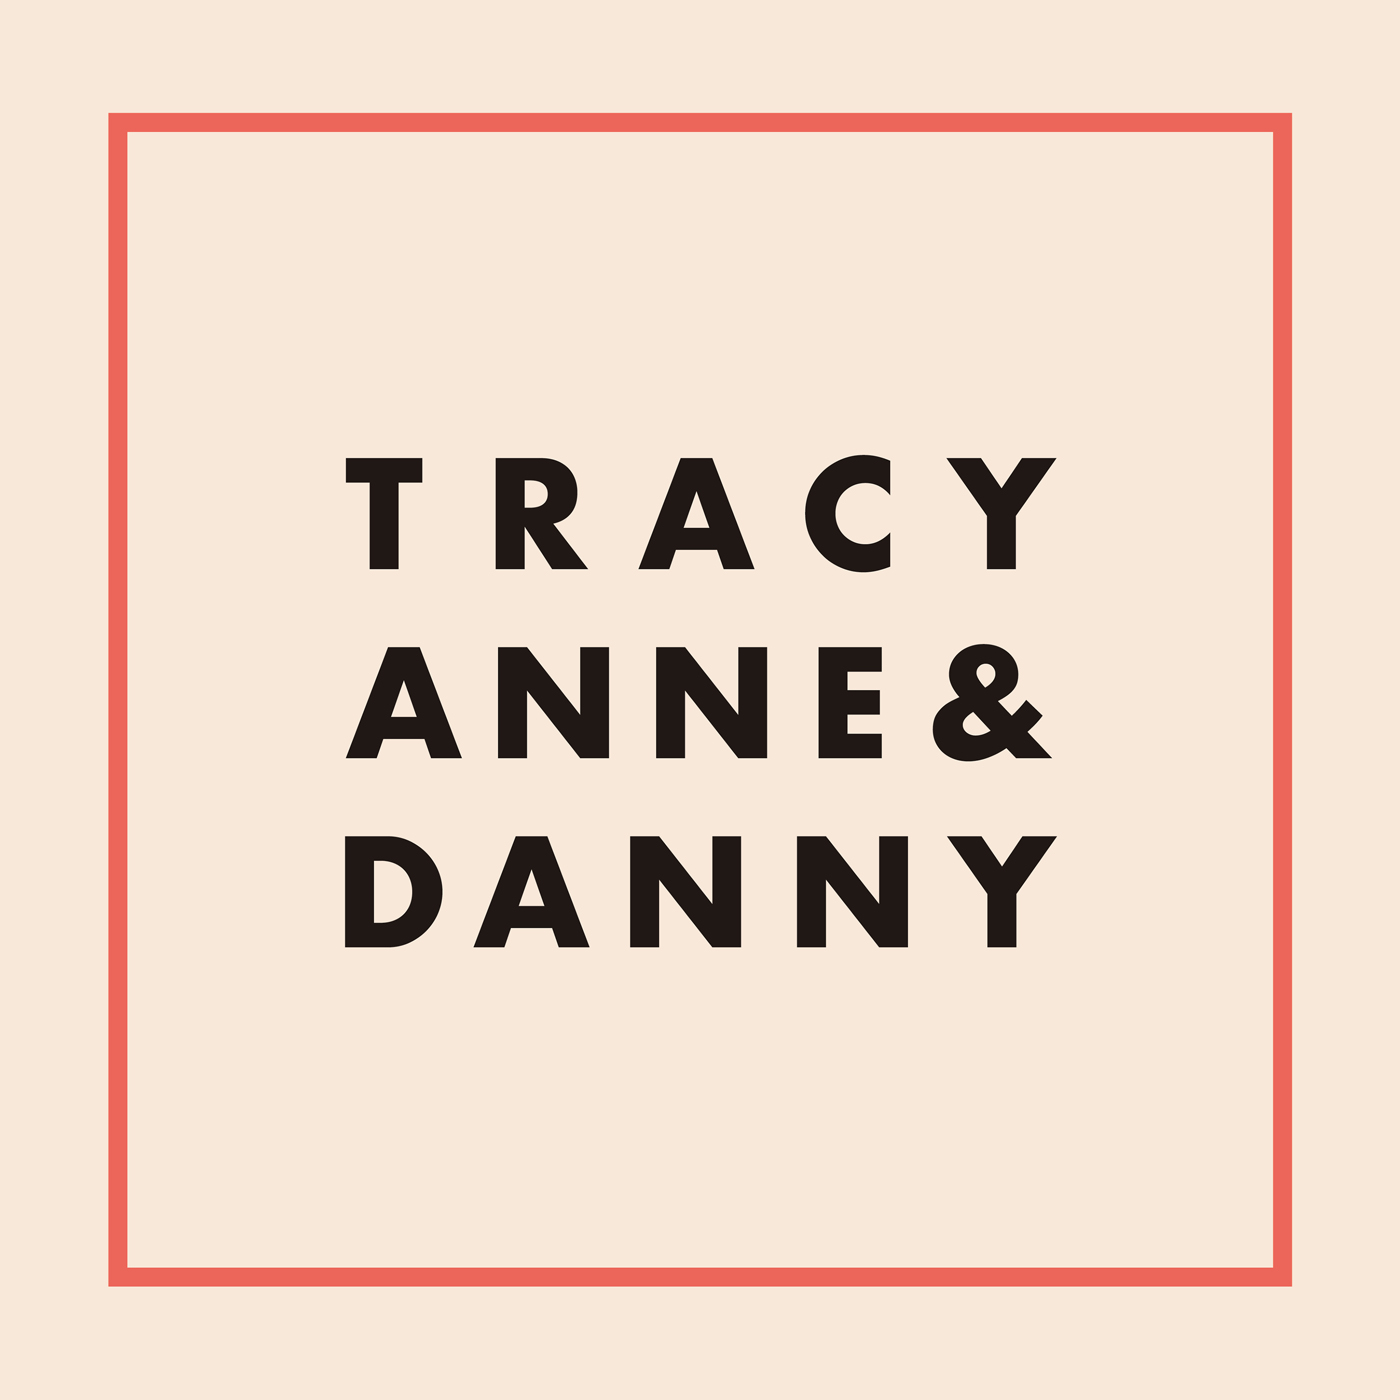 Tracyanne & Danny - Tracyanne & Danny (Ltd Opaque Red v